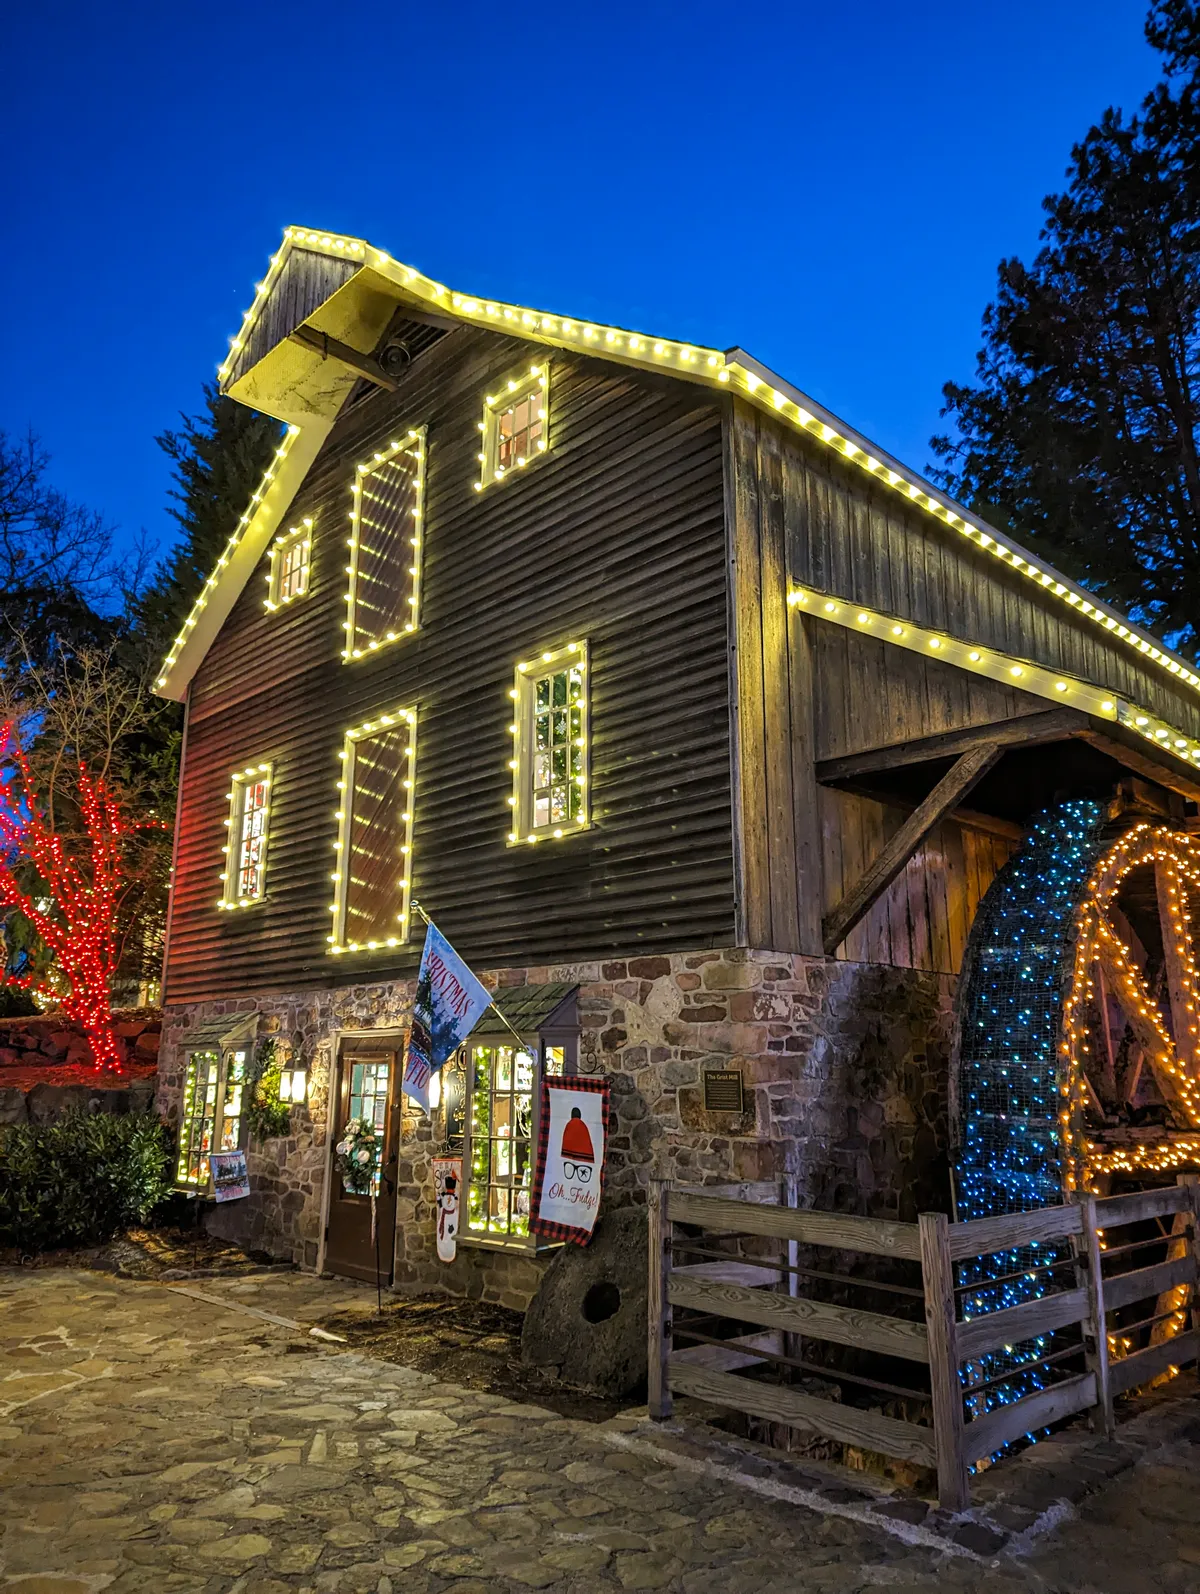 Pine Wreath & Candle shop decorated for the holidays at Peddler's Village with Christmas lights around the windows, roof, and waterwheel. 